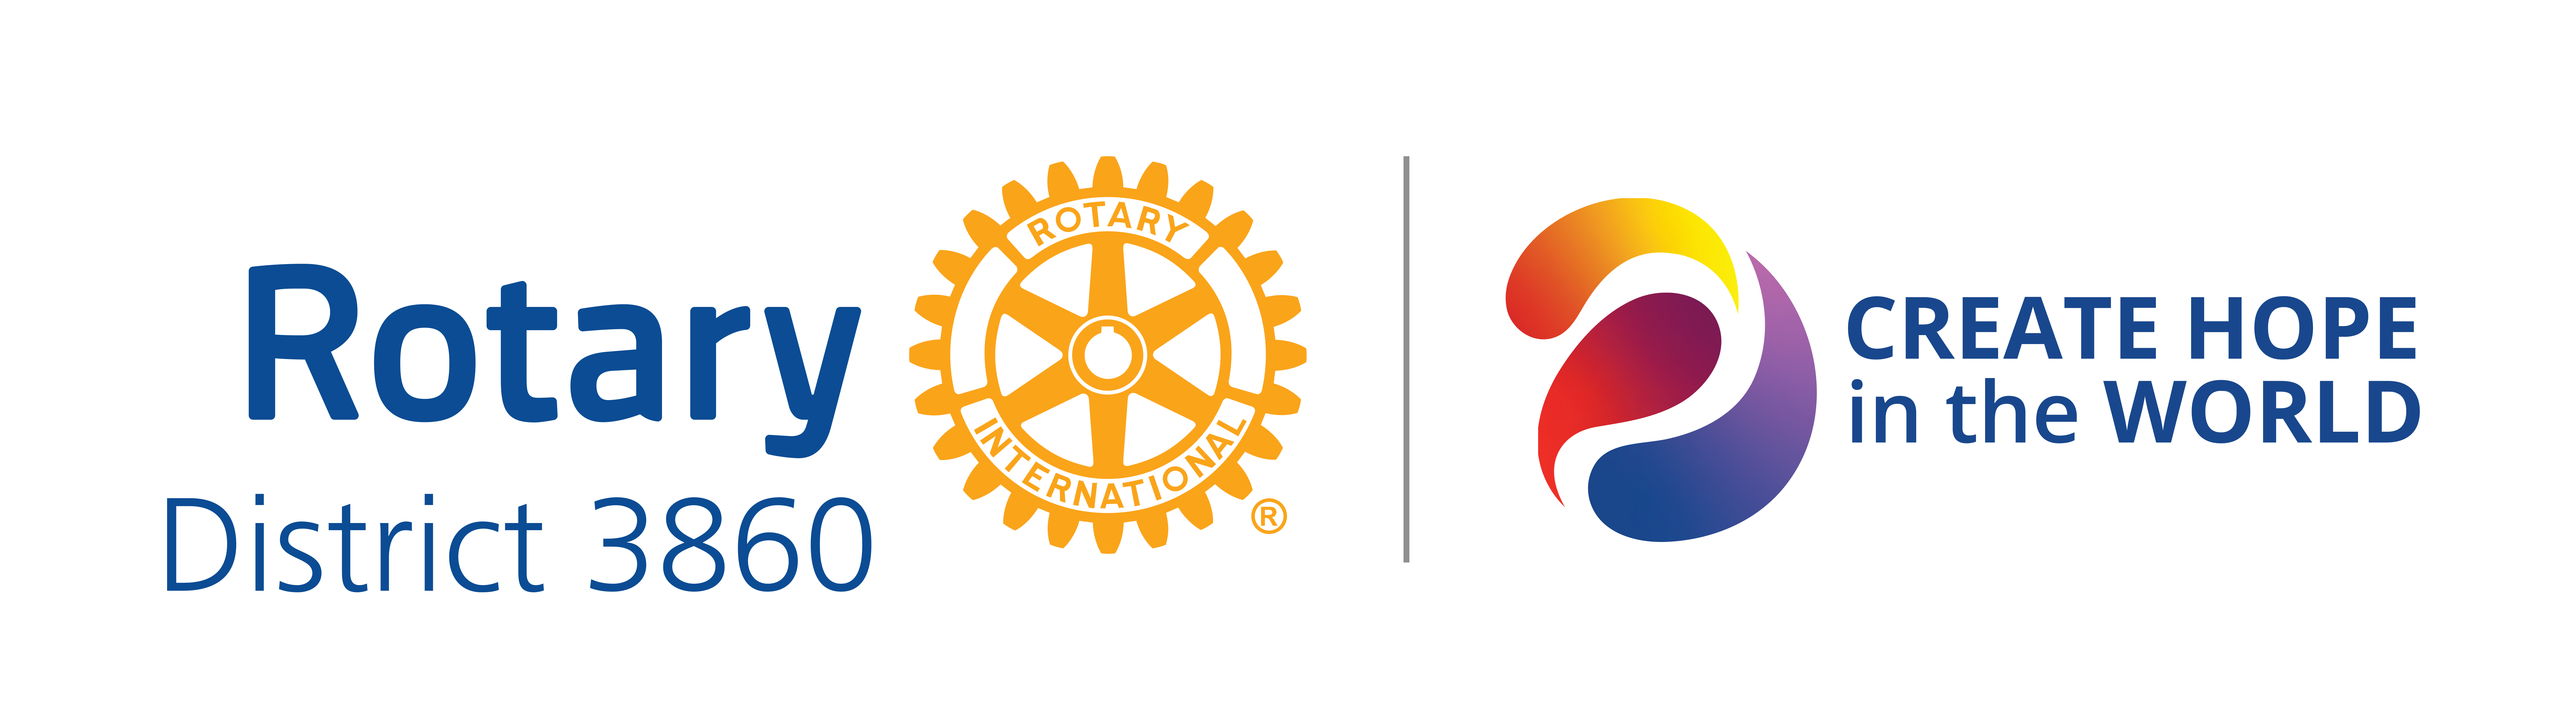 Rotary District 3860 • Official Website